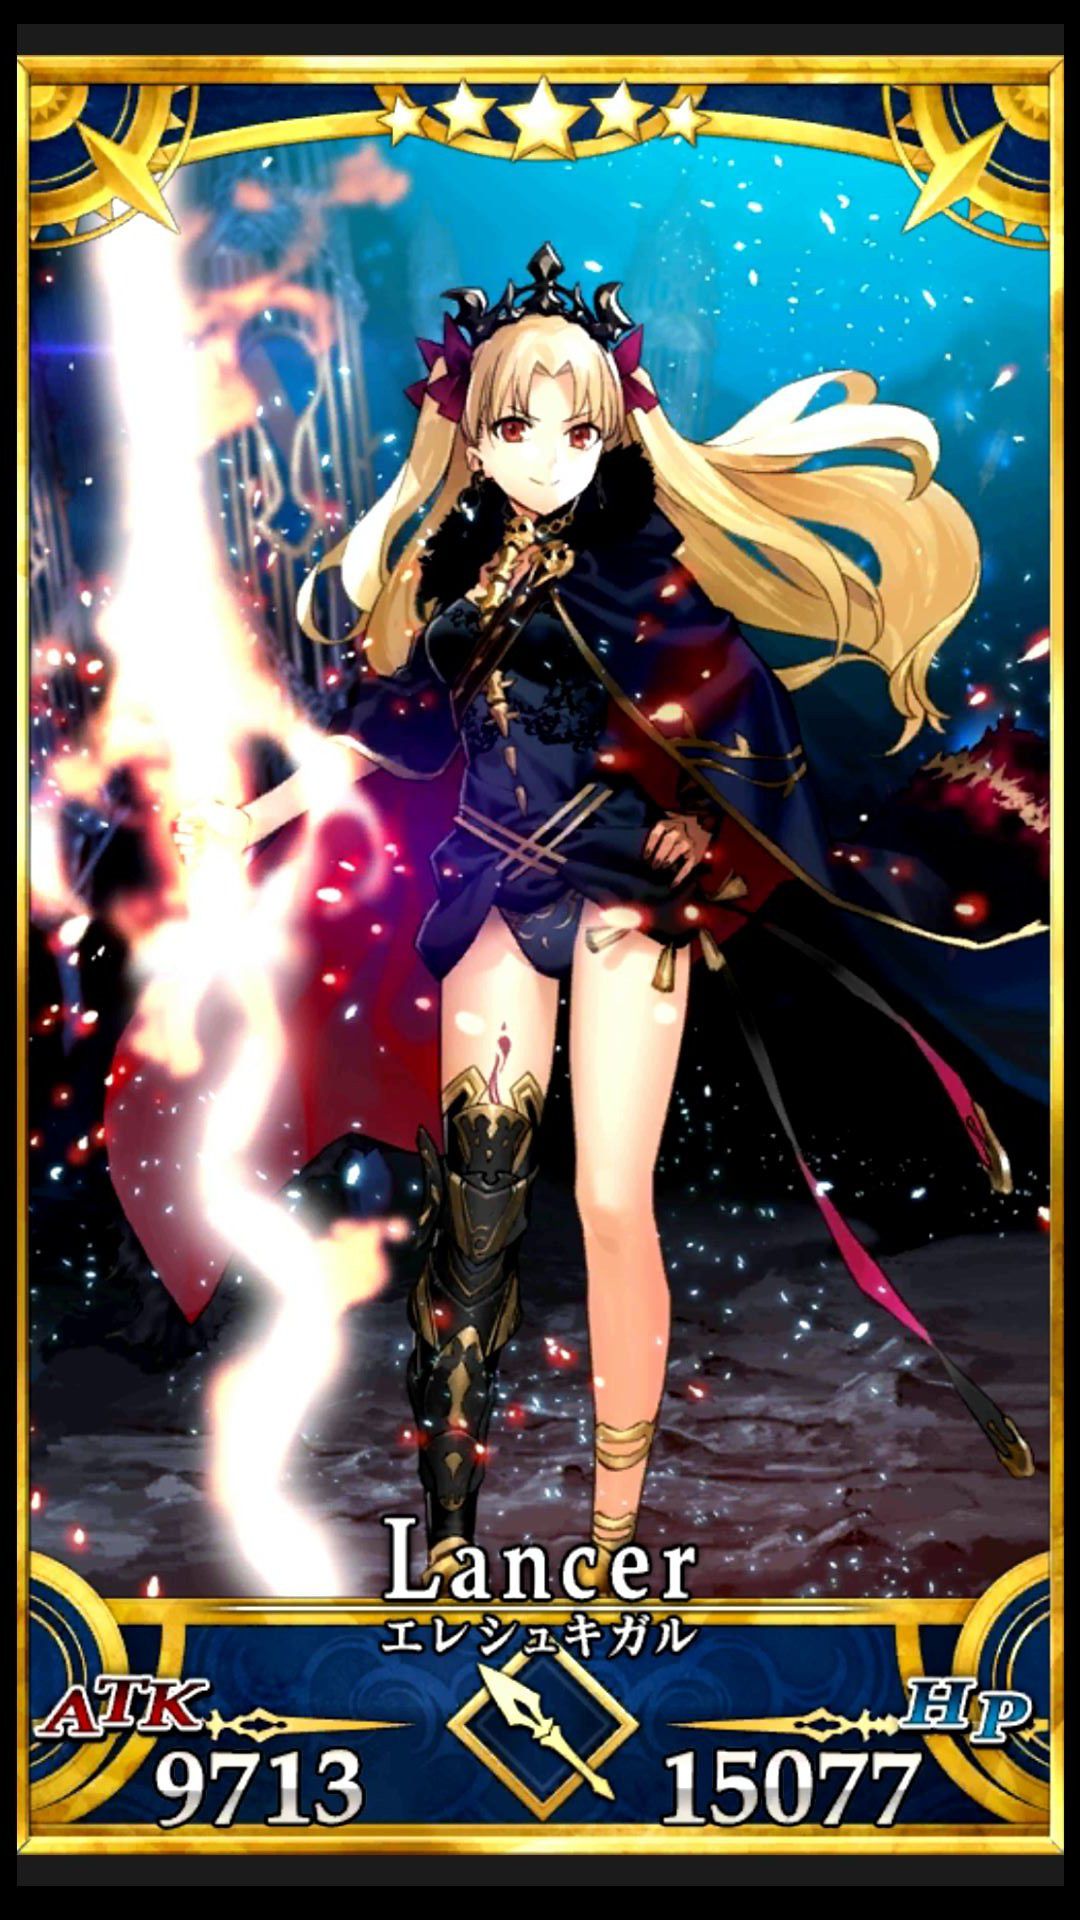 [Fate/Grand order] The final second coming illustrations cute Ereshkigal transcendence! 4